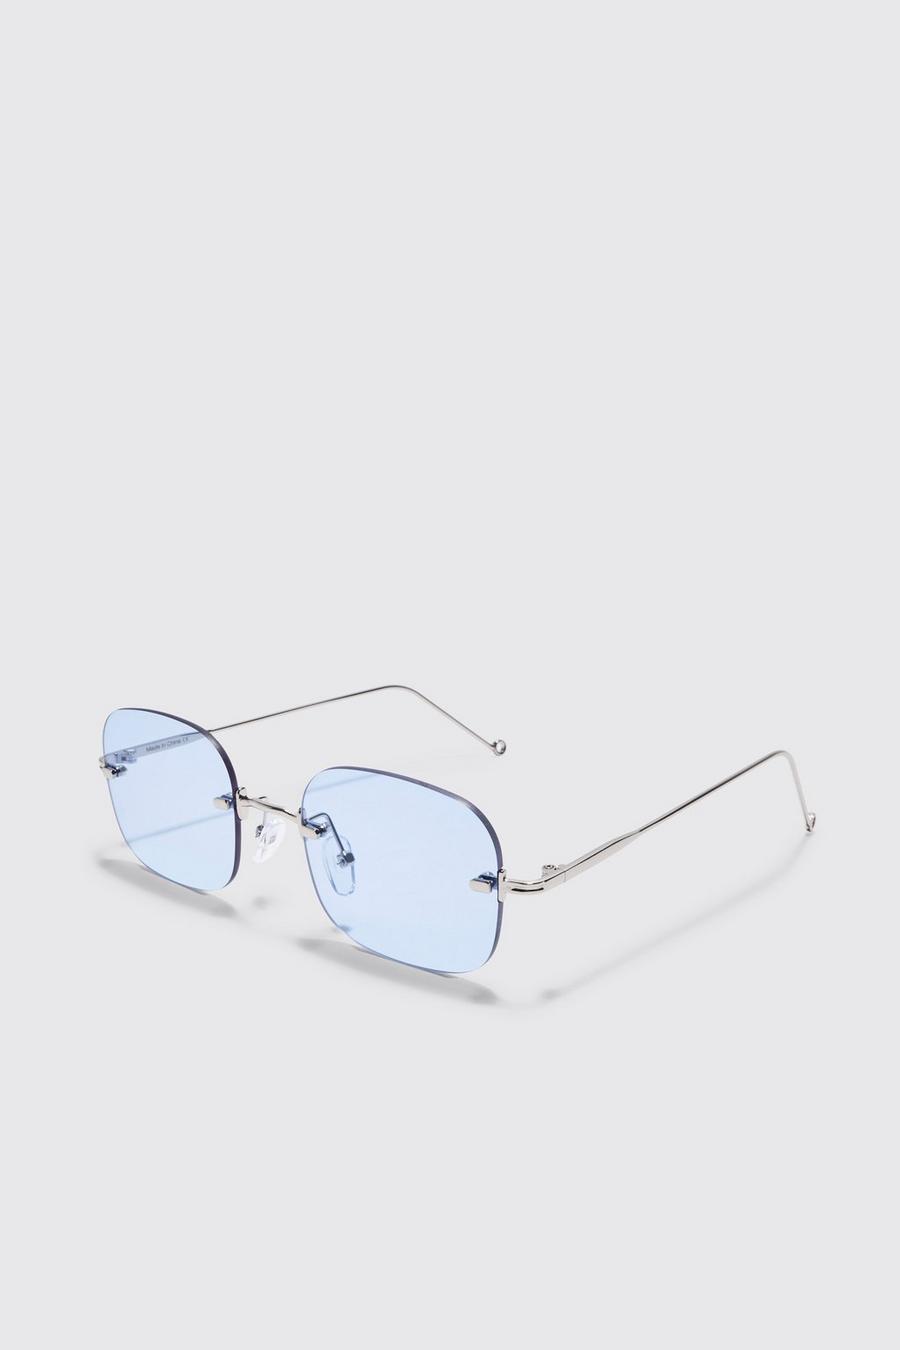 Silver sunglasses LNV629S 424 image number 1